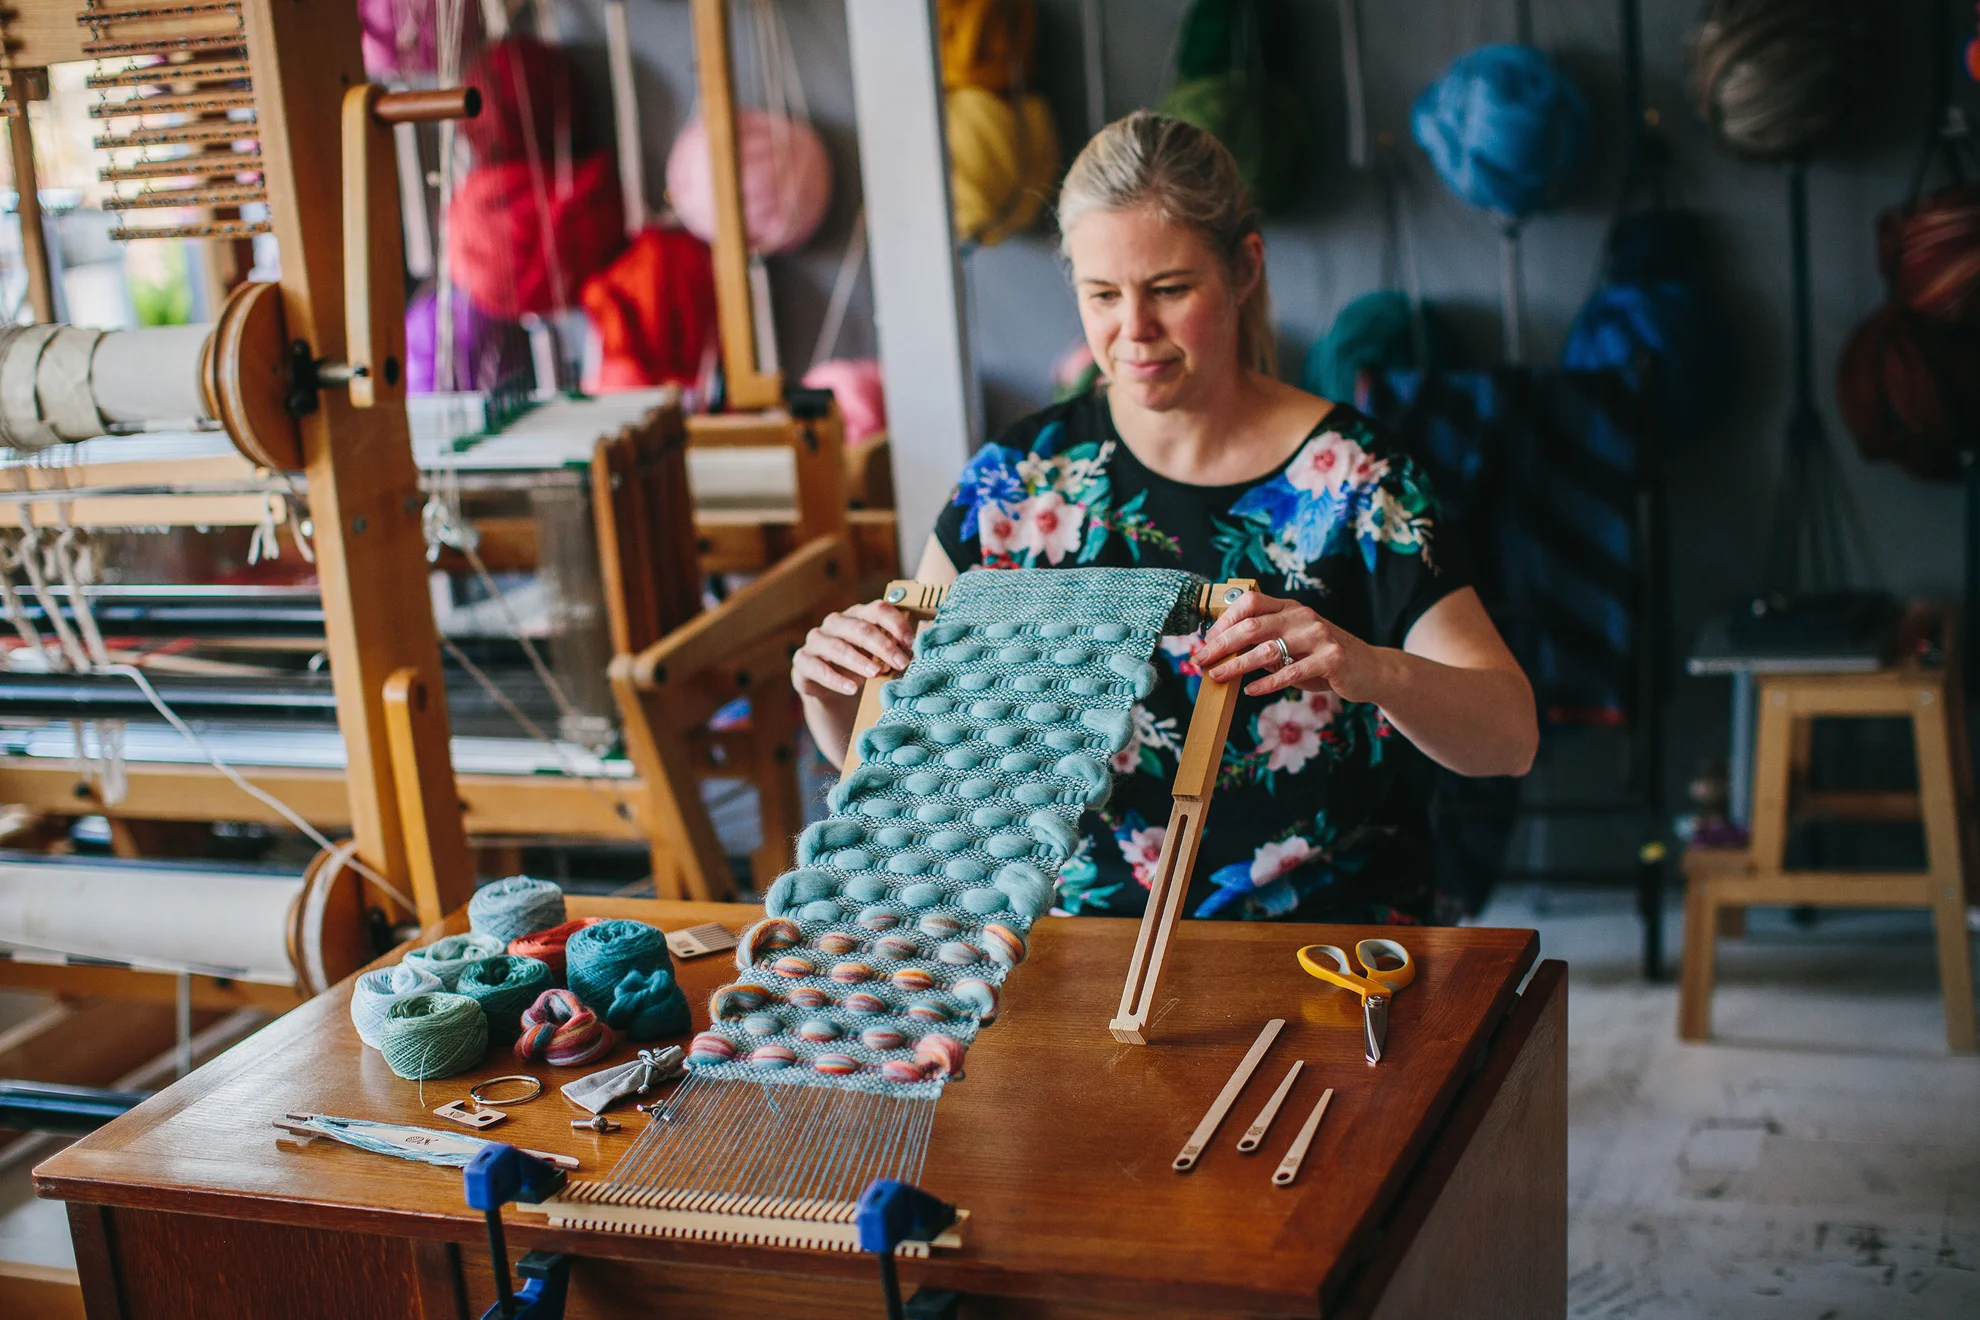 Where you can learn to weave in the UK